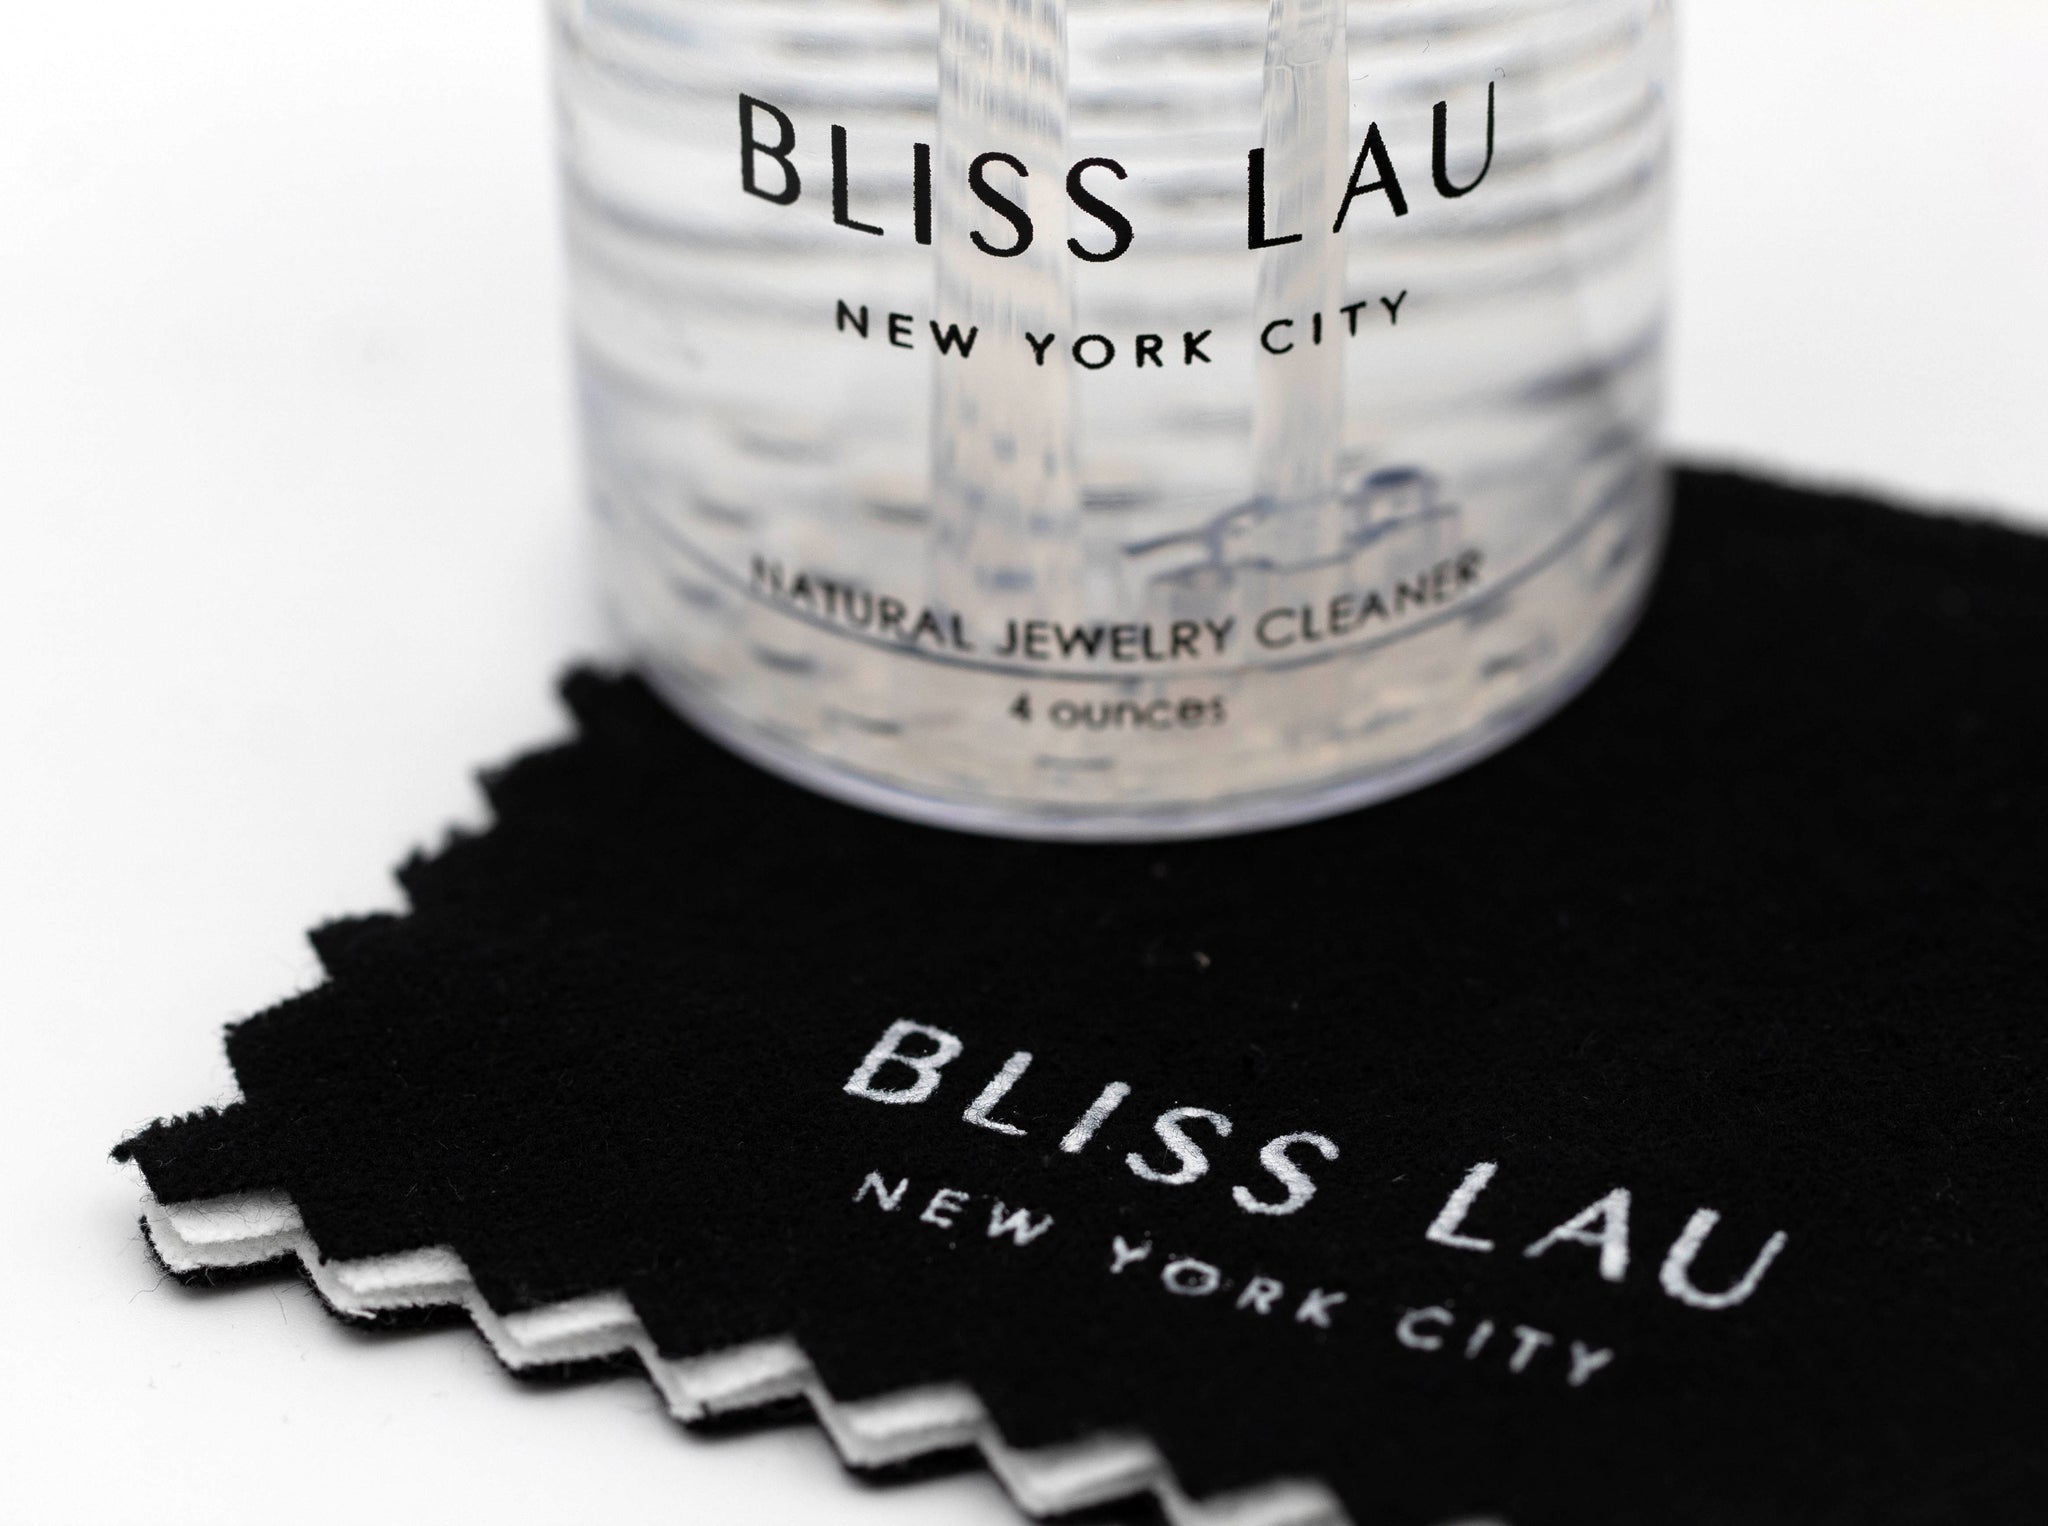 Bliss Lau Jewelry Care Set Natural Jewelry Cleaner Polishing Cloth